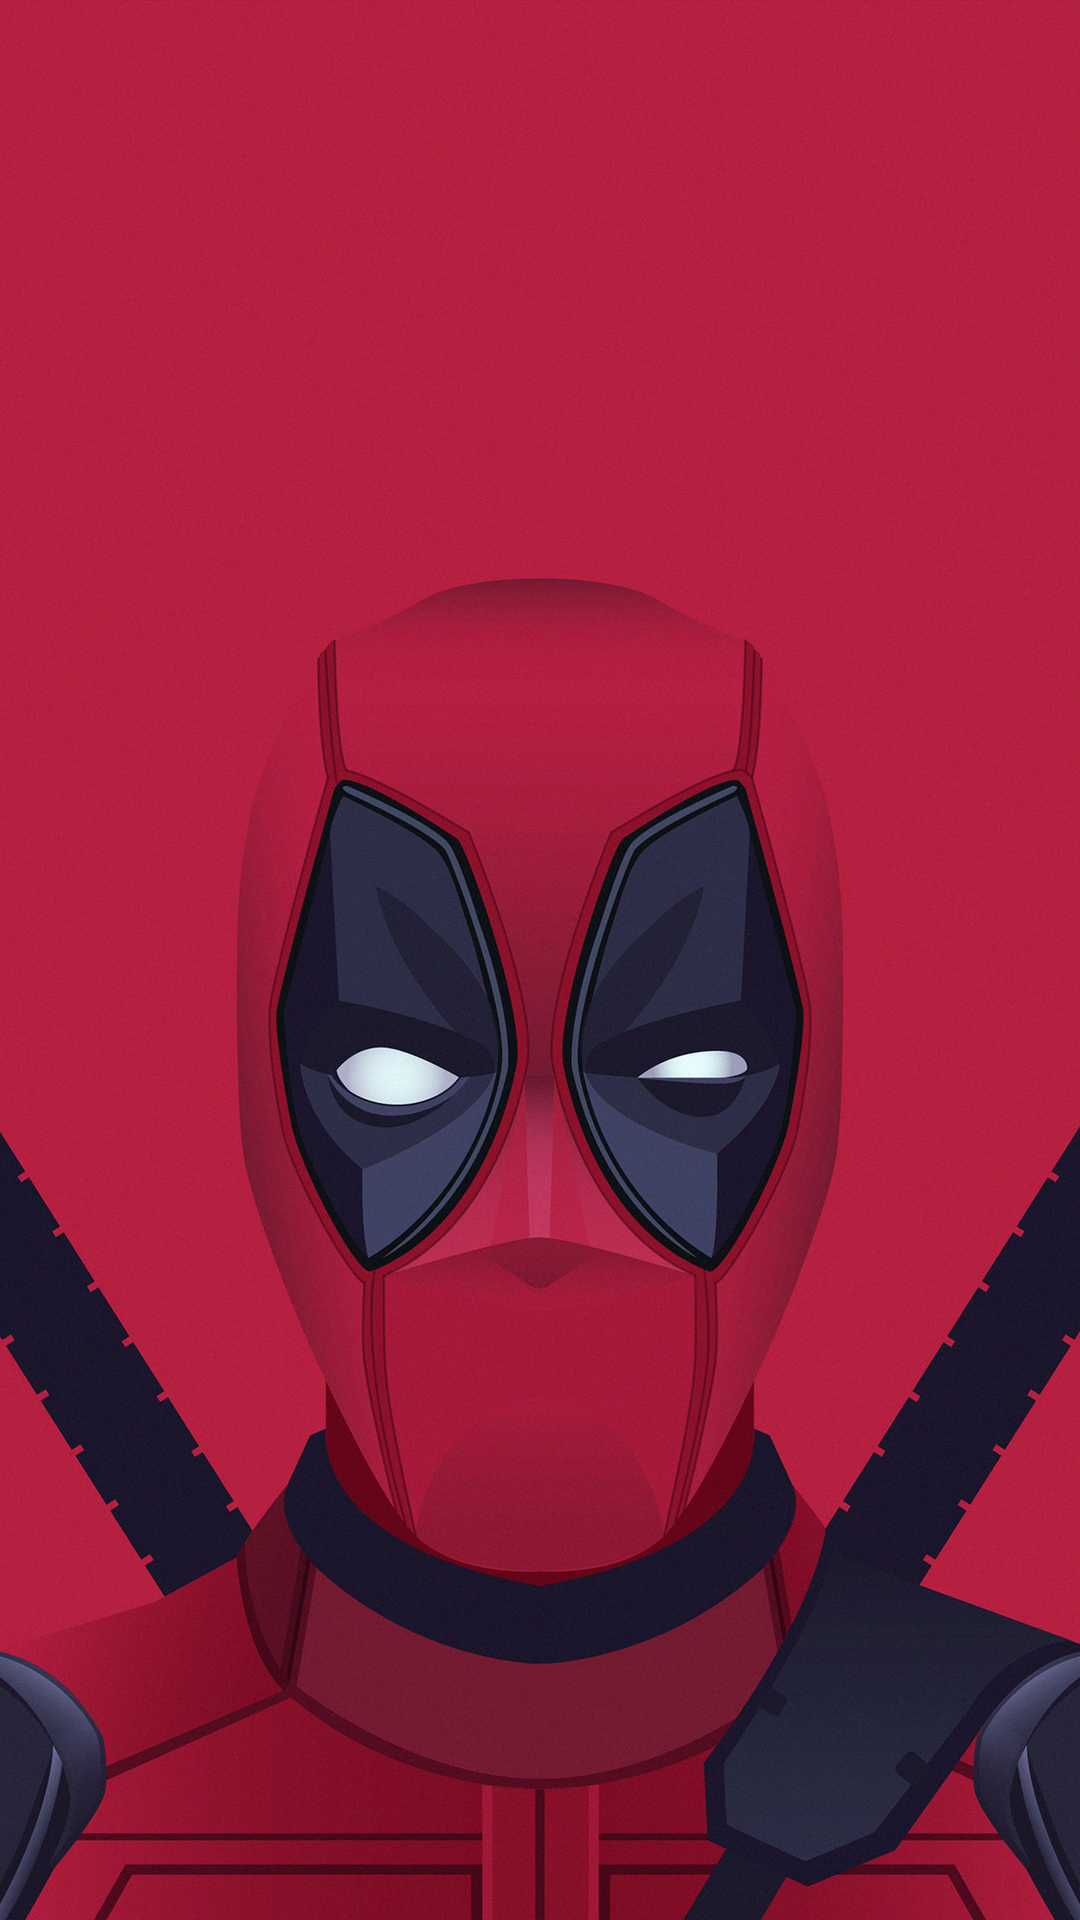 1080x1920 Deadpool Arts 4k Iphone 7,6s,6 Plus, Pixel xl ,One Plus 3,3t,5 HD  4k Wallpapers, Images, Backgrounds, Photos and Pictures